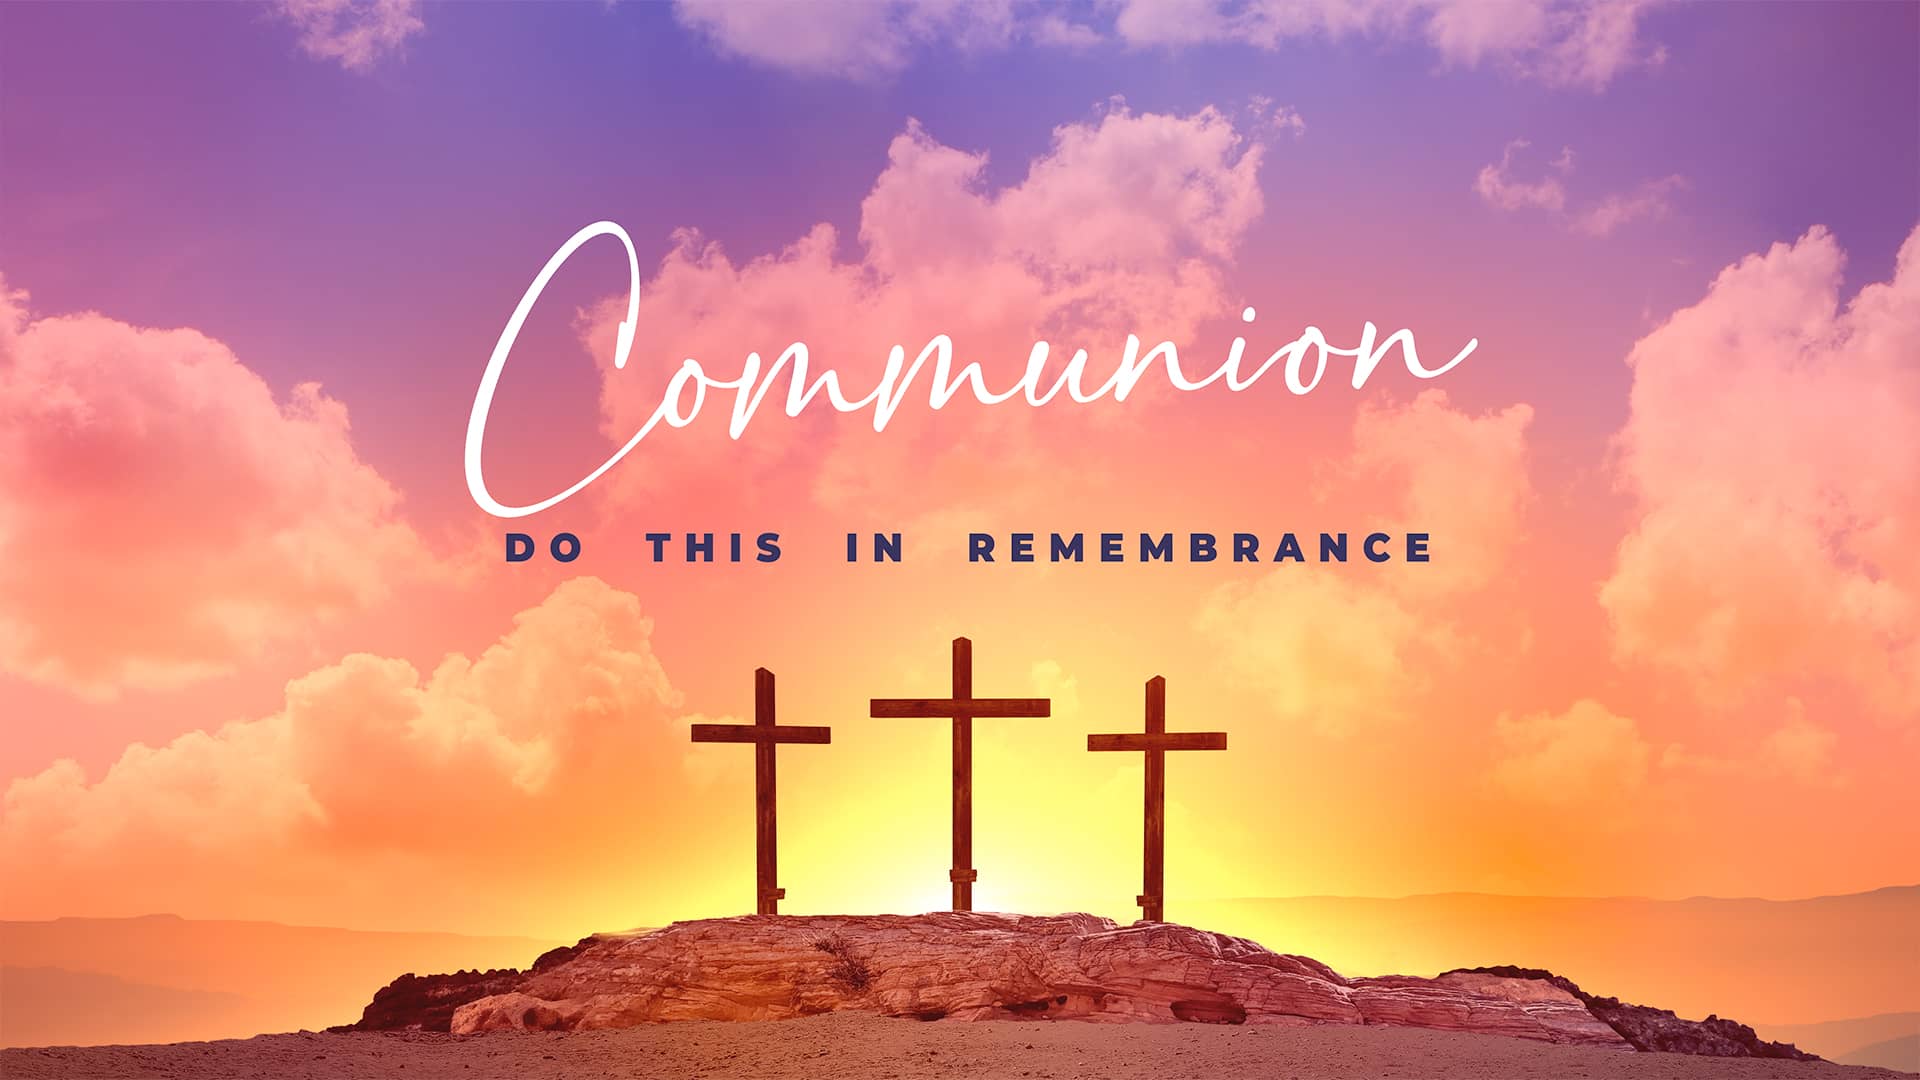 Easter Sunday Collection: Communion